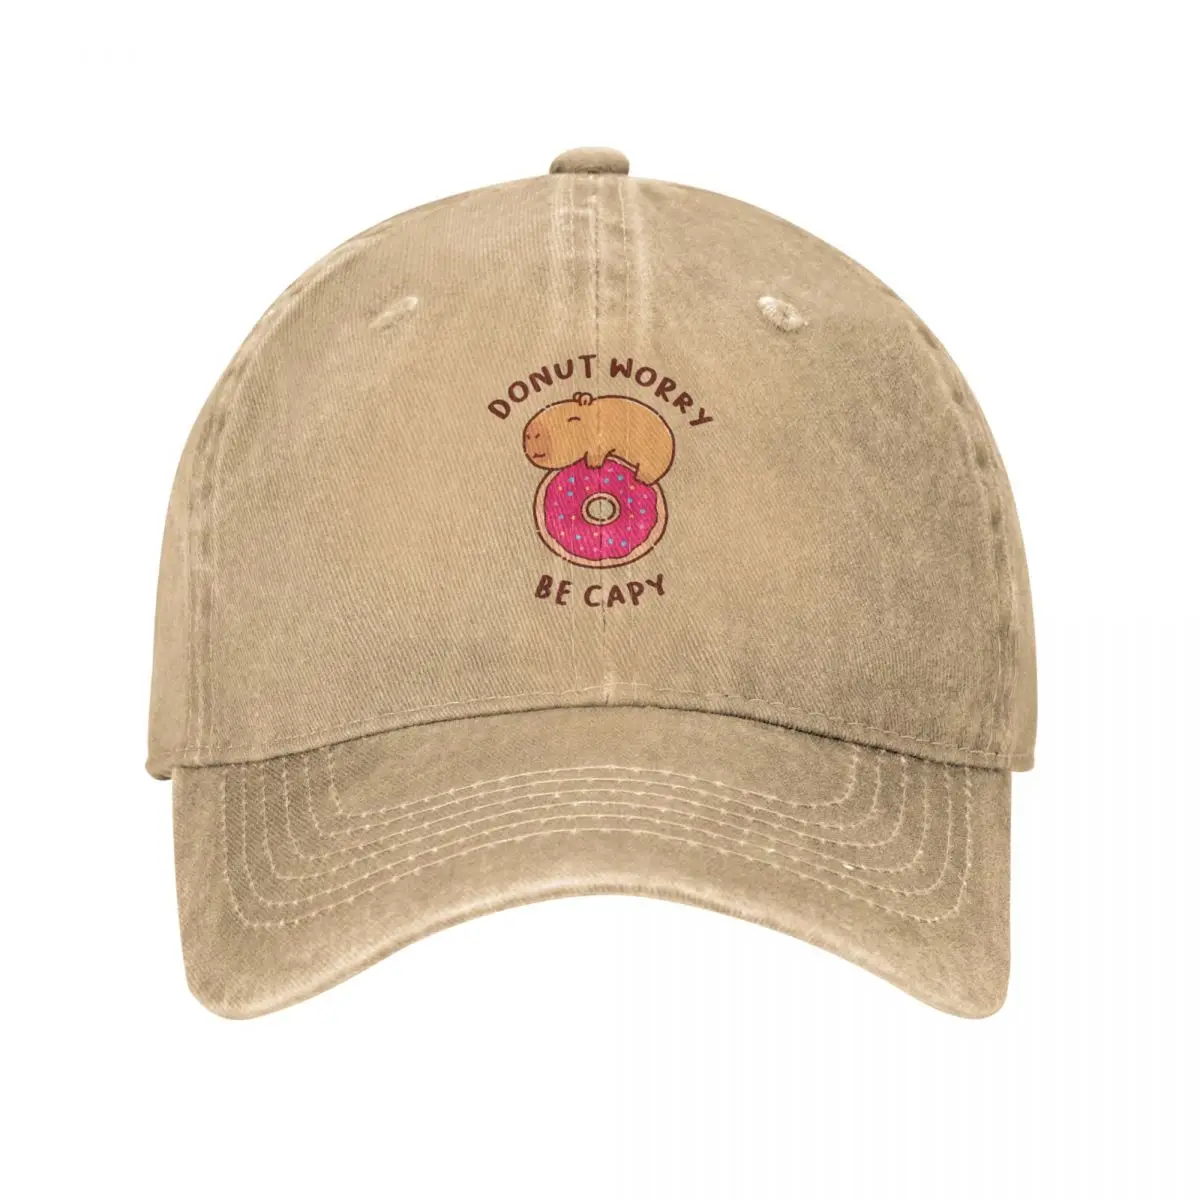 

Capybara On A Donut, Don't Worry Be Happy, Be Capy Baseball Caps Denim Hats Adjustable Casquette Hip Hop Baseball Cowboy Hat